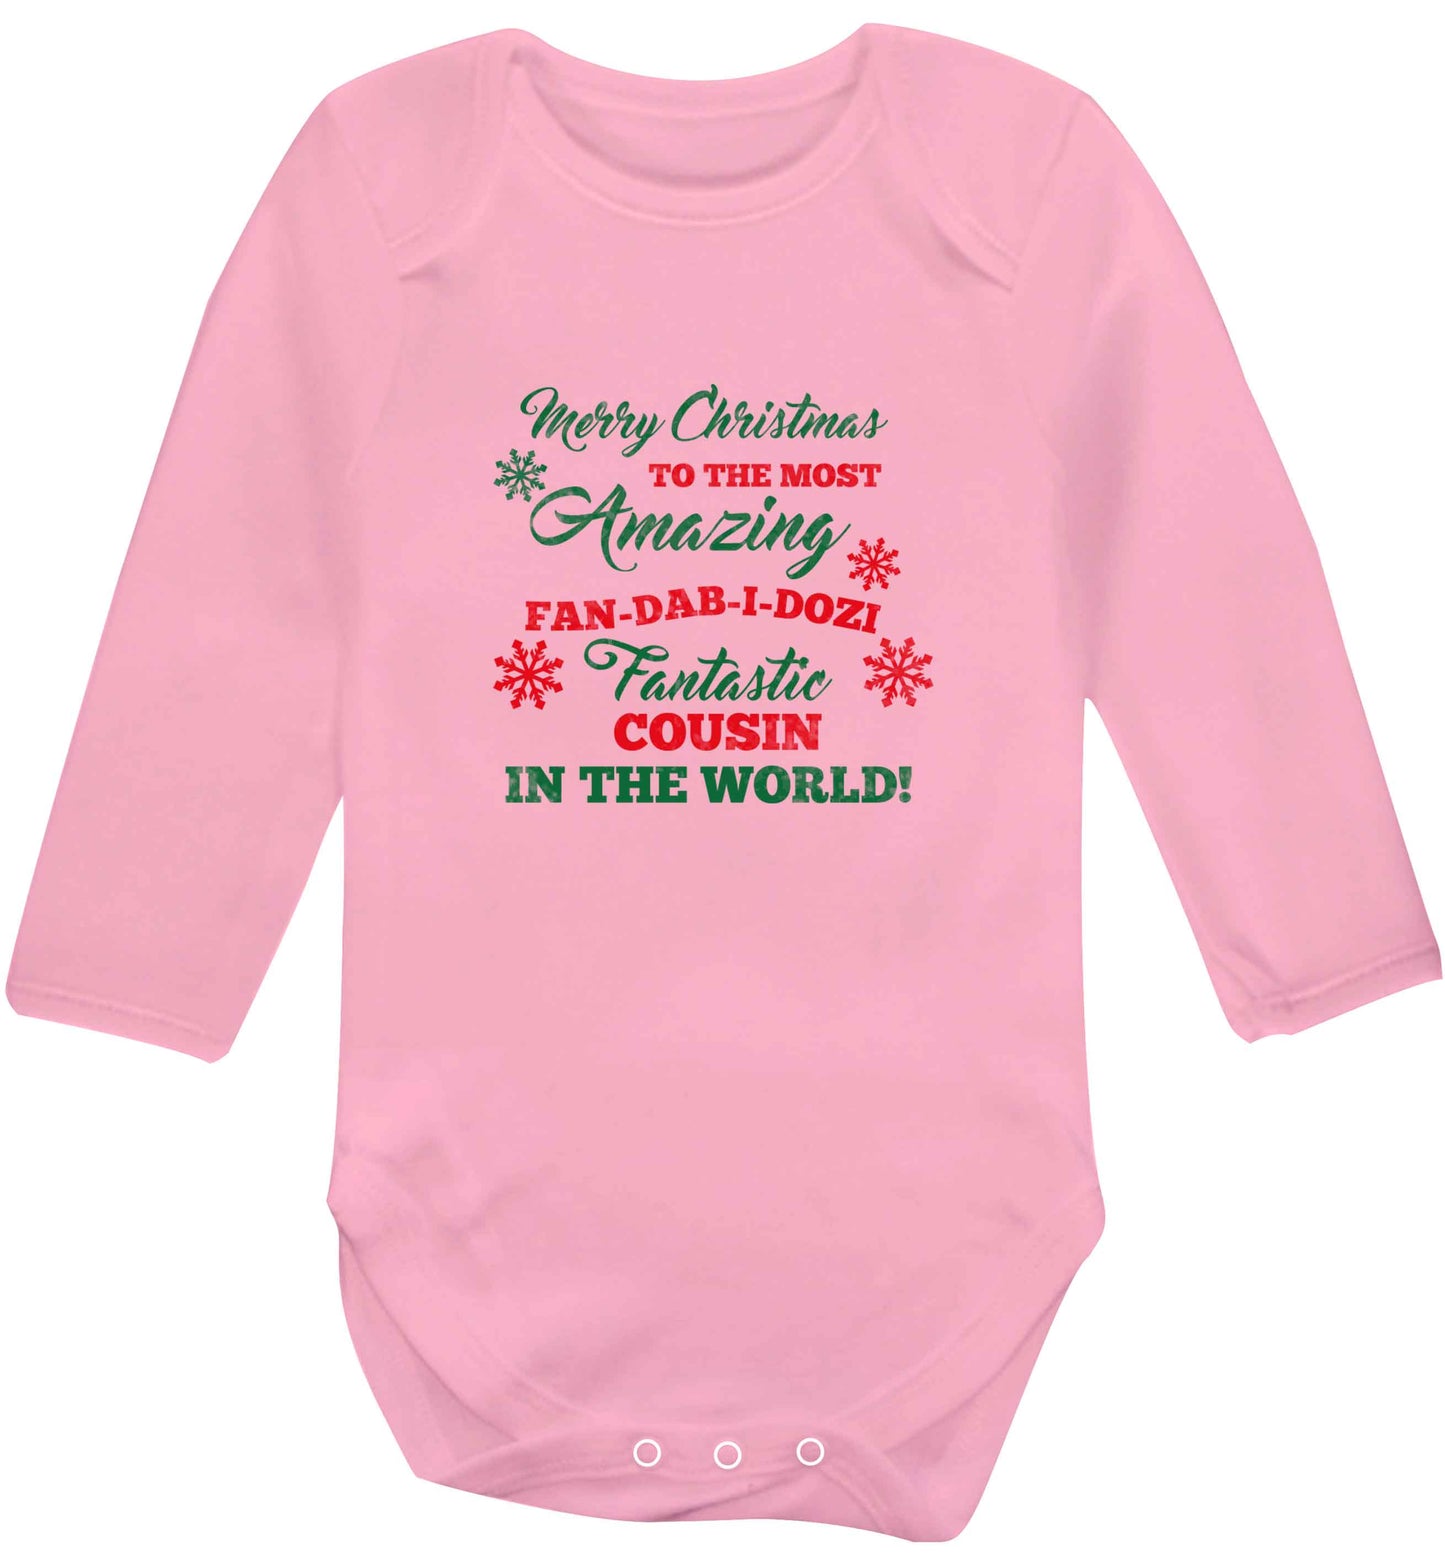 Merry Christmas to the most amazing fan-dab-i-dozi fantasic Cousin in the world baby vest long sleeved pale pink 6-12 months